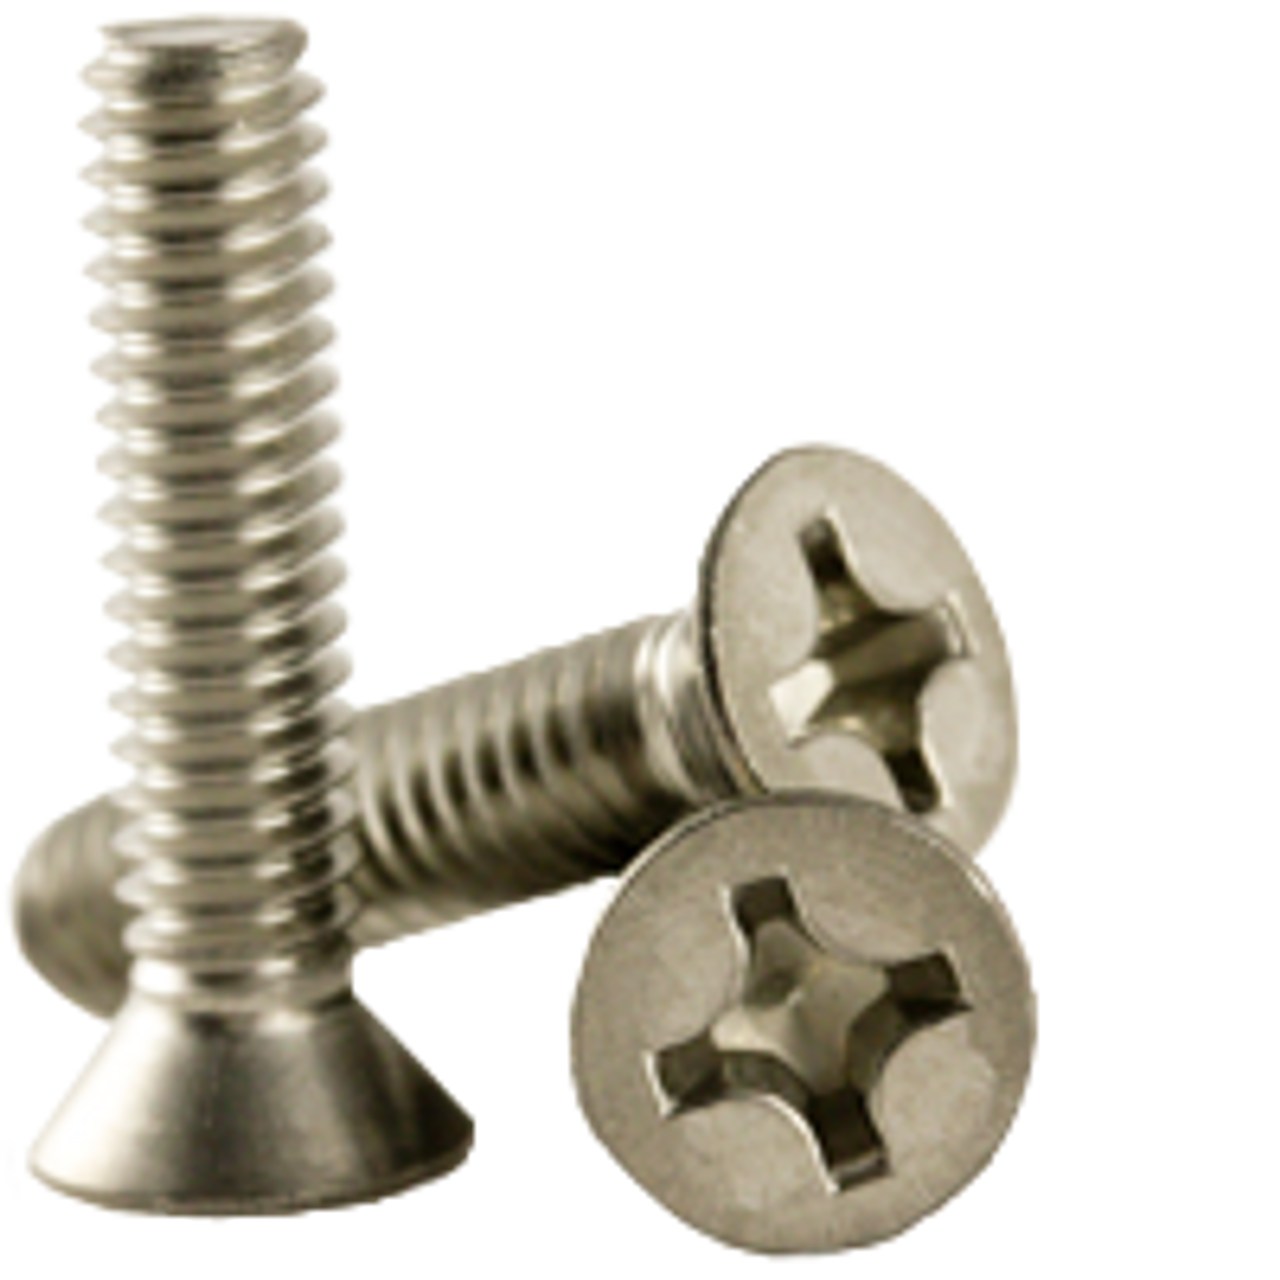 18-8 Stainless Steel Thread Cutting Screw Phillips Drive Type F Plain Finish 3/8 Length #6-32 Thread Size Pack of 100 82 Degree Flat Head 